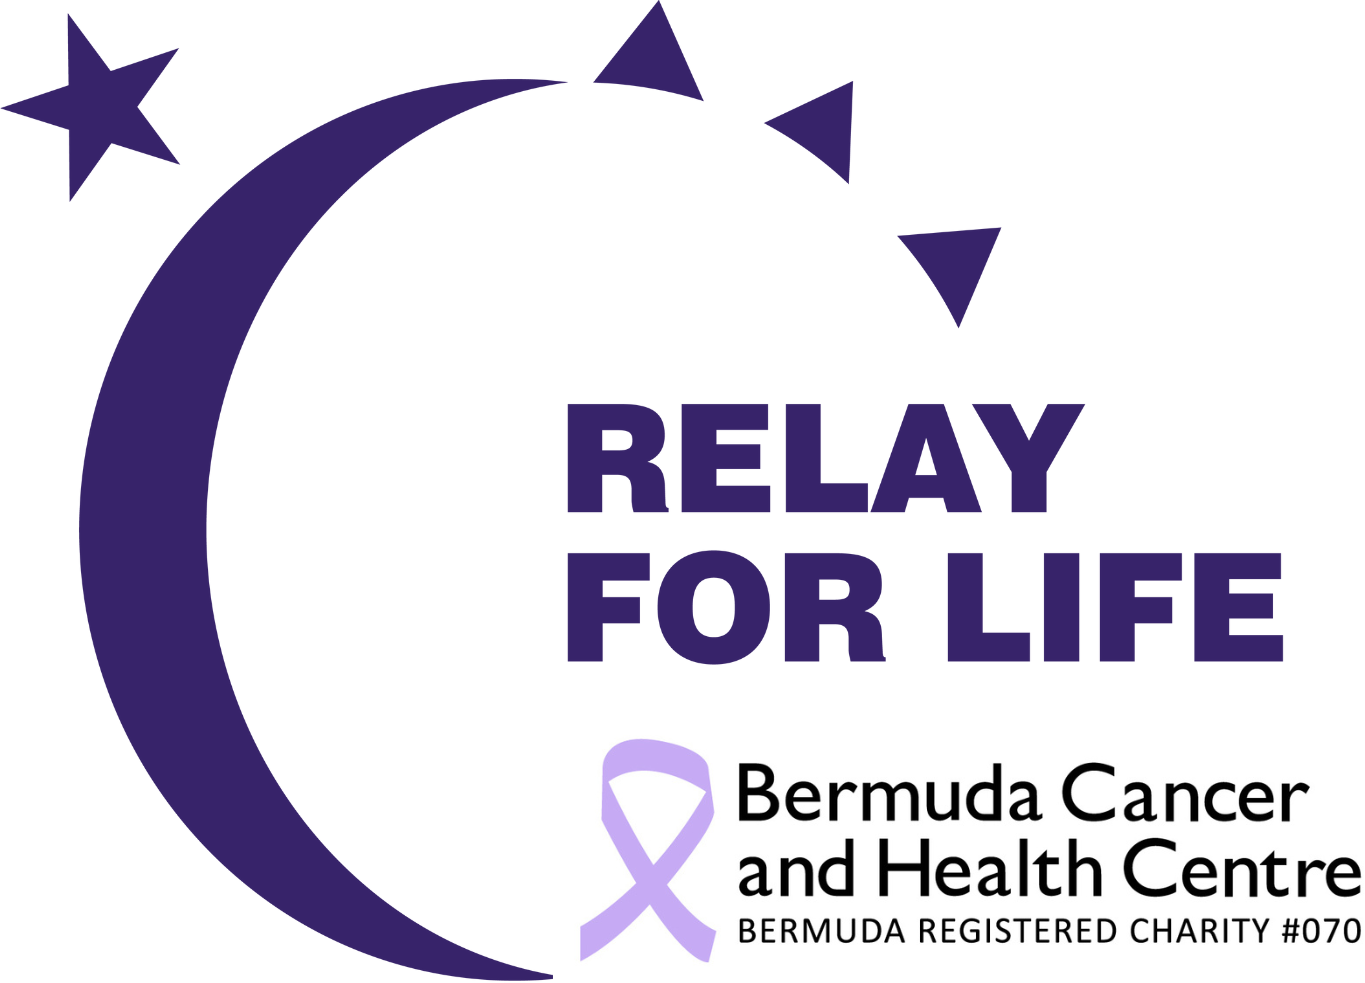 Relay for Life - Bermuda Cancer and Health Centre